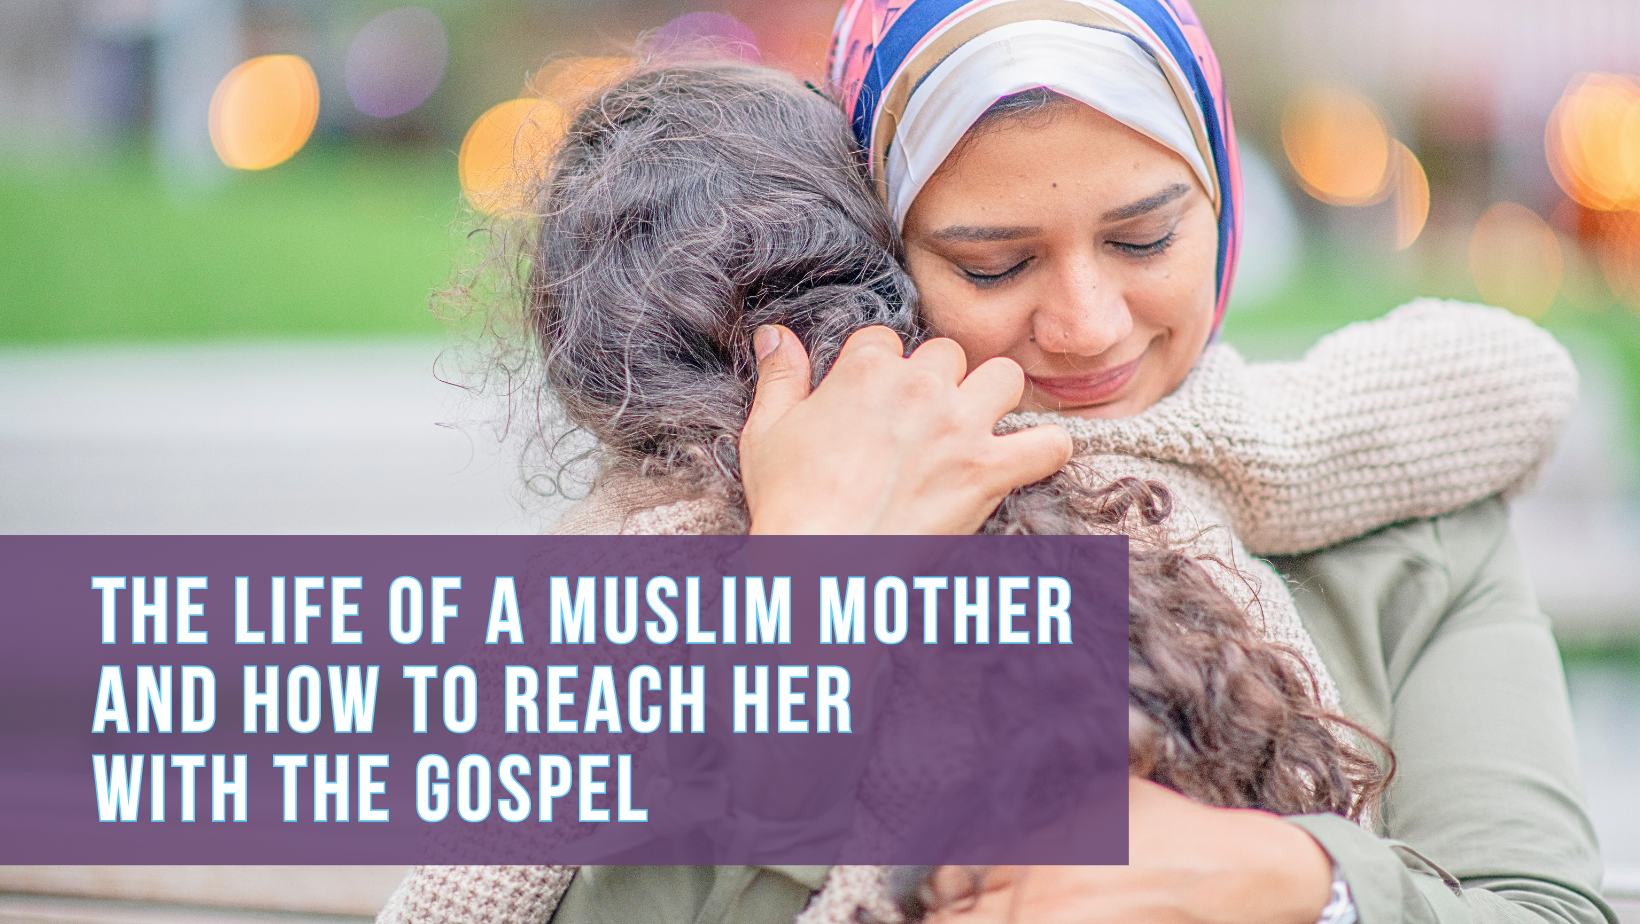 The life of a Muslim mother and how to reach her with the Gospel